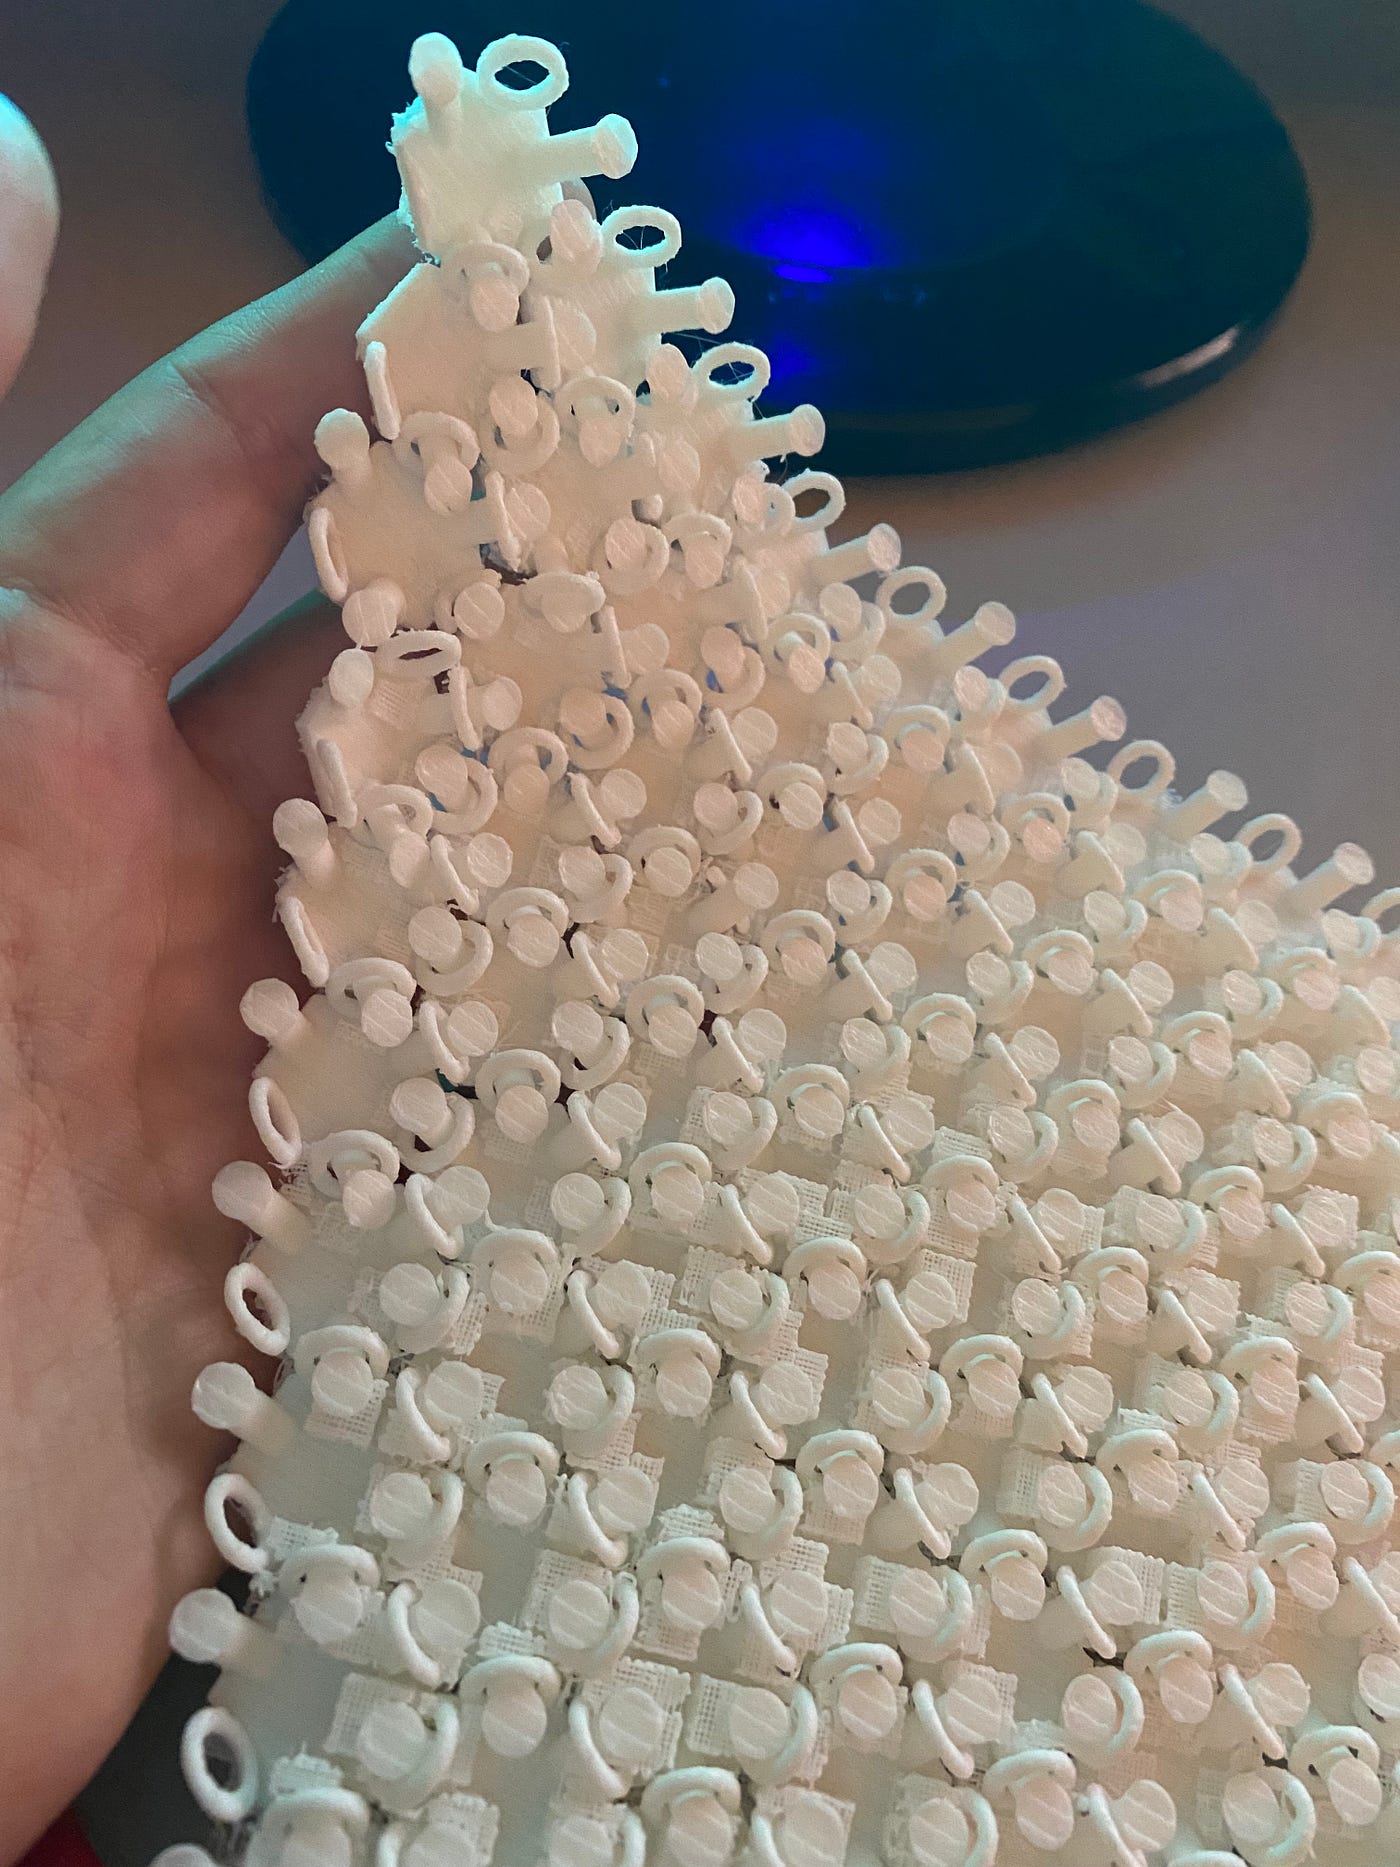 I Replicated 3D Printed Chainmail | by Valkyrie Holmes | Bootcamp